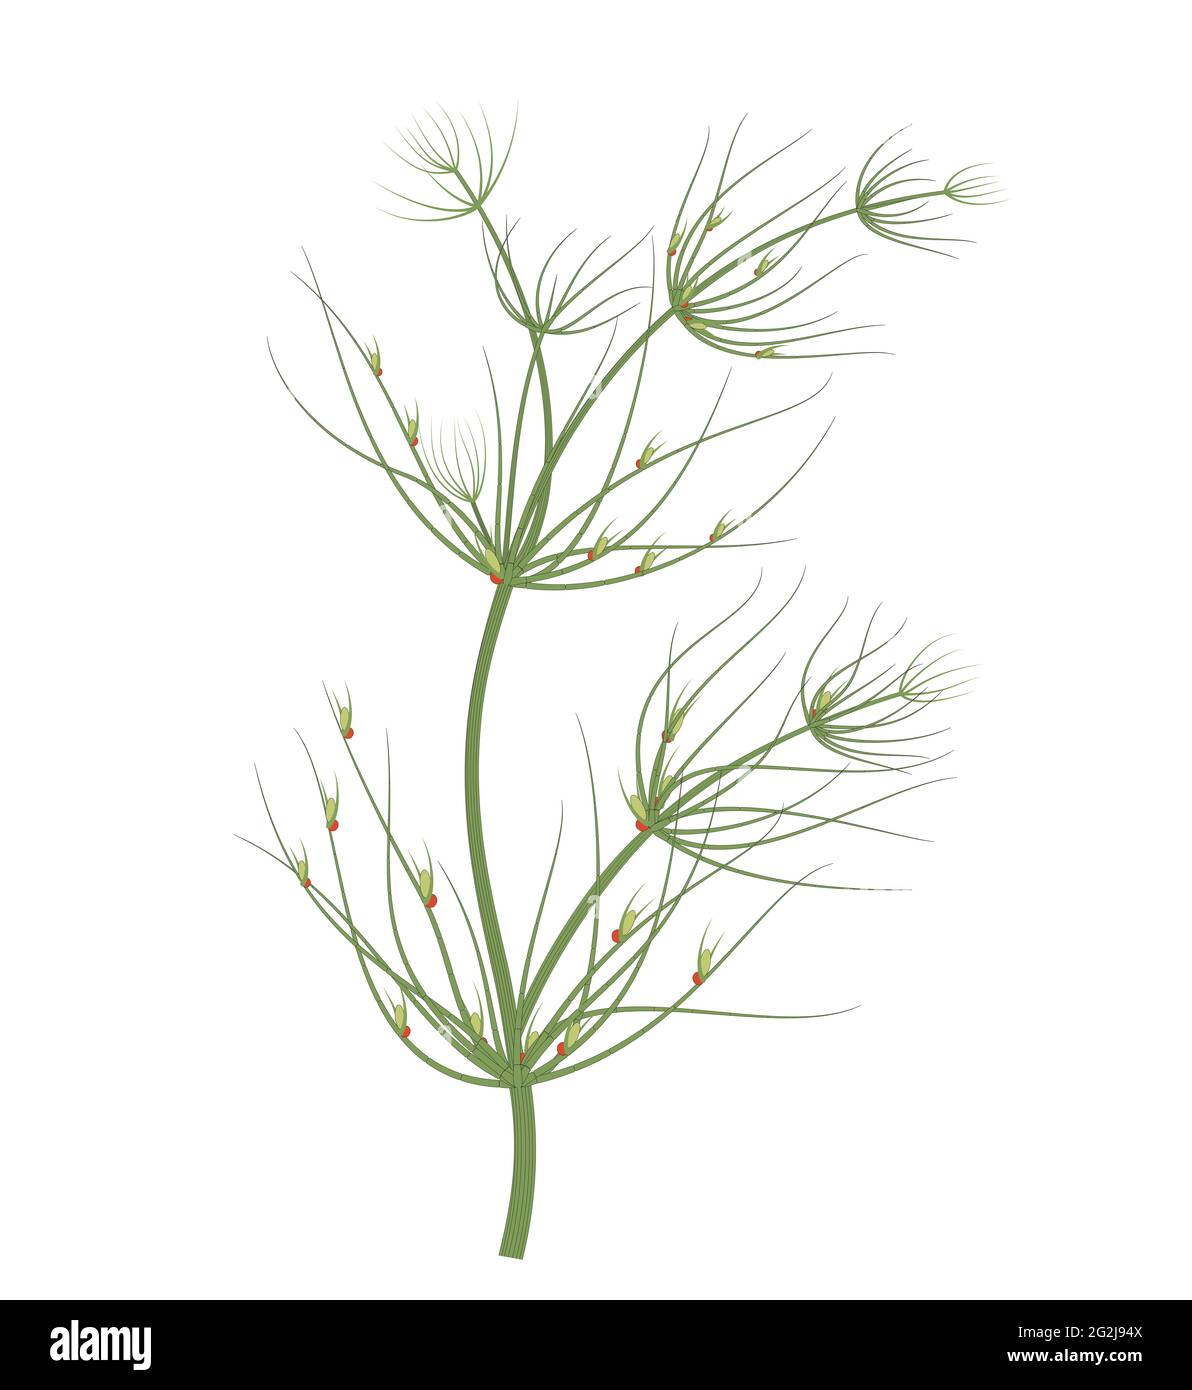 Chara is a fresh water, green alga. Chara is commonly called “muskgrass” Stock Photo